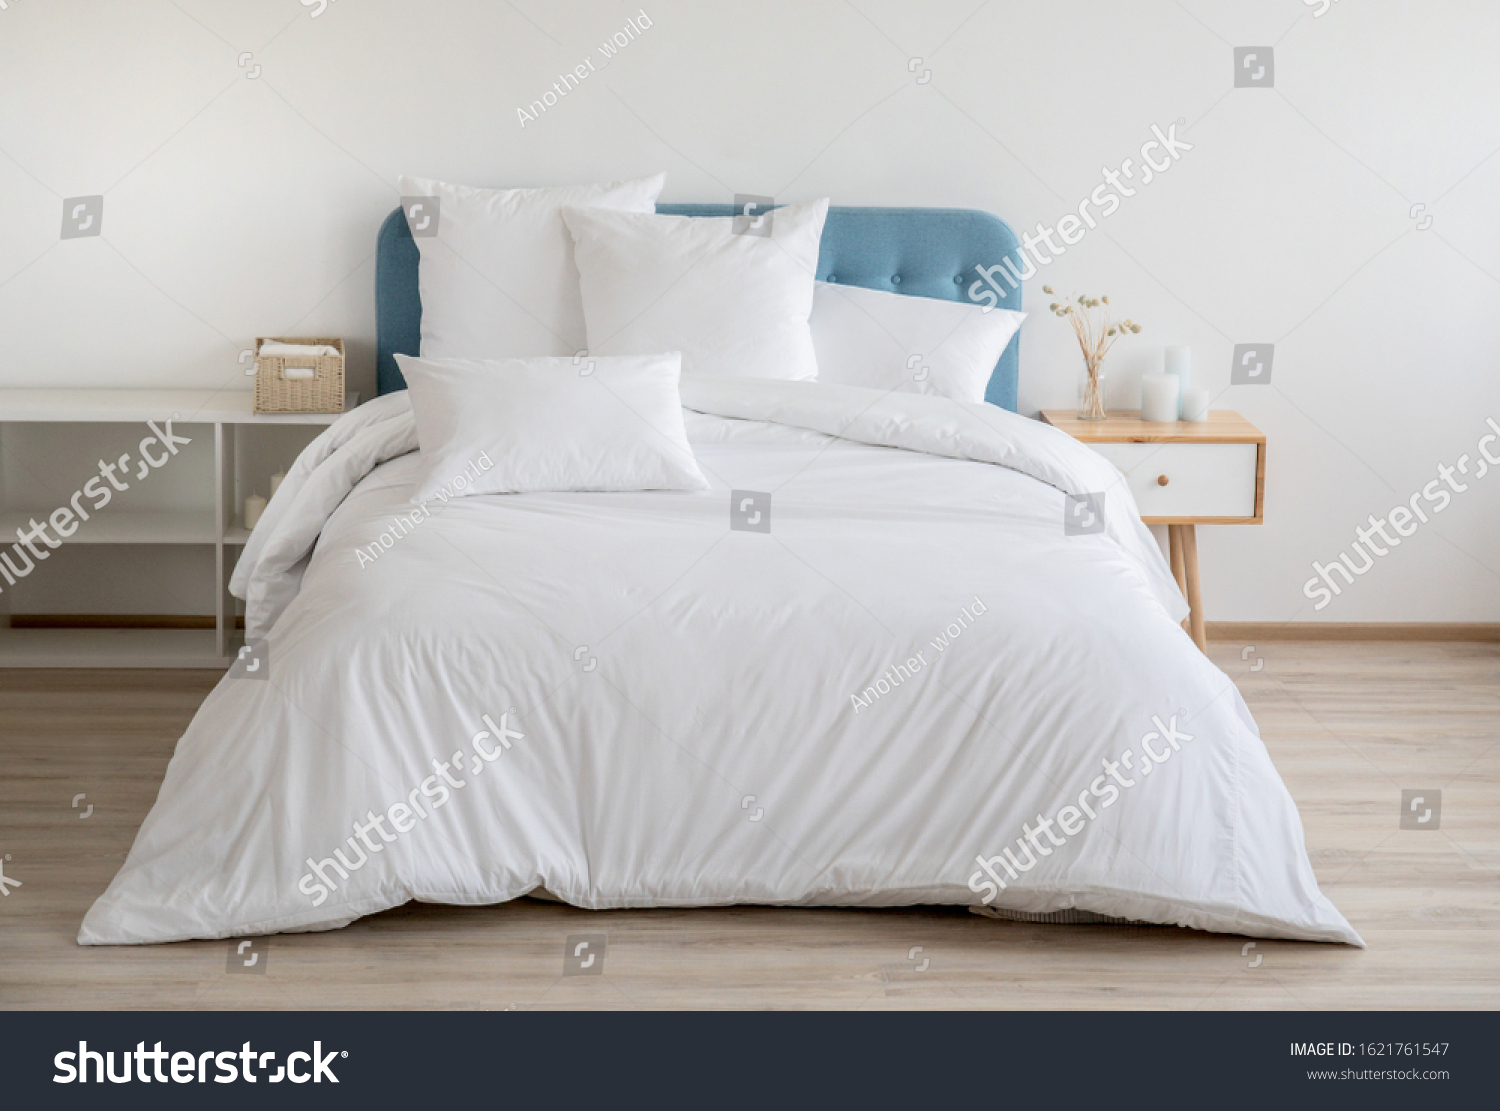 Interior with white bed linen on the sofa. Bedroom with bed, white bedding, and bedside table. White pillows, duvet and duvet case on bed with blue headboard. Front view. #1621761547